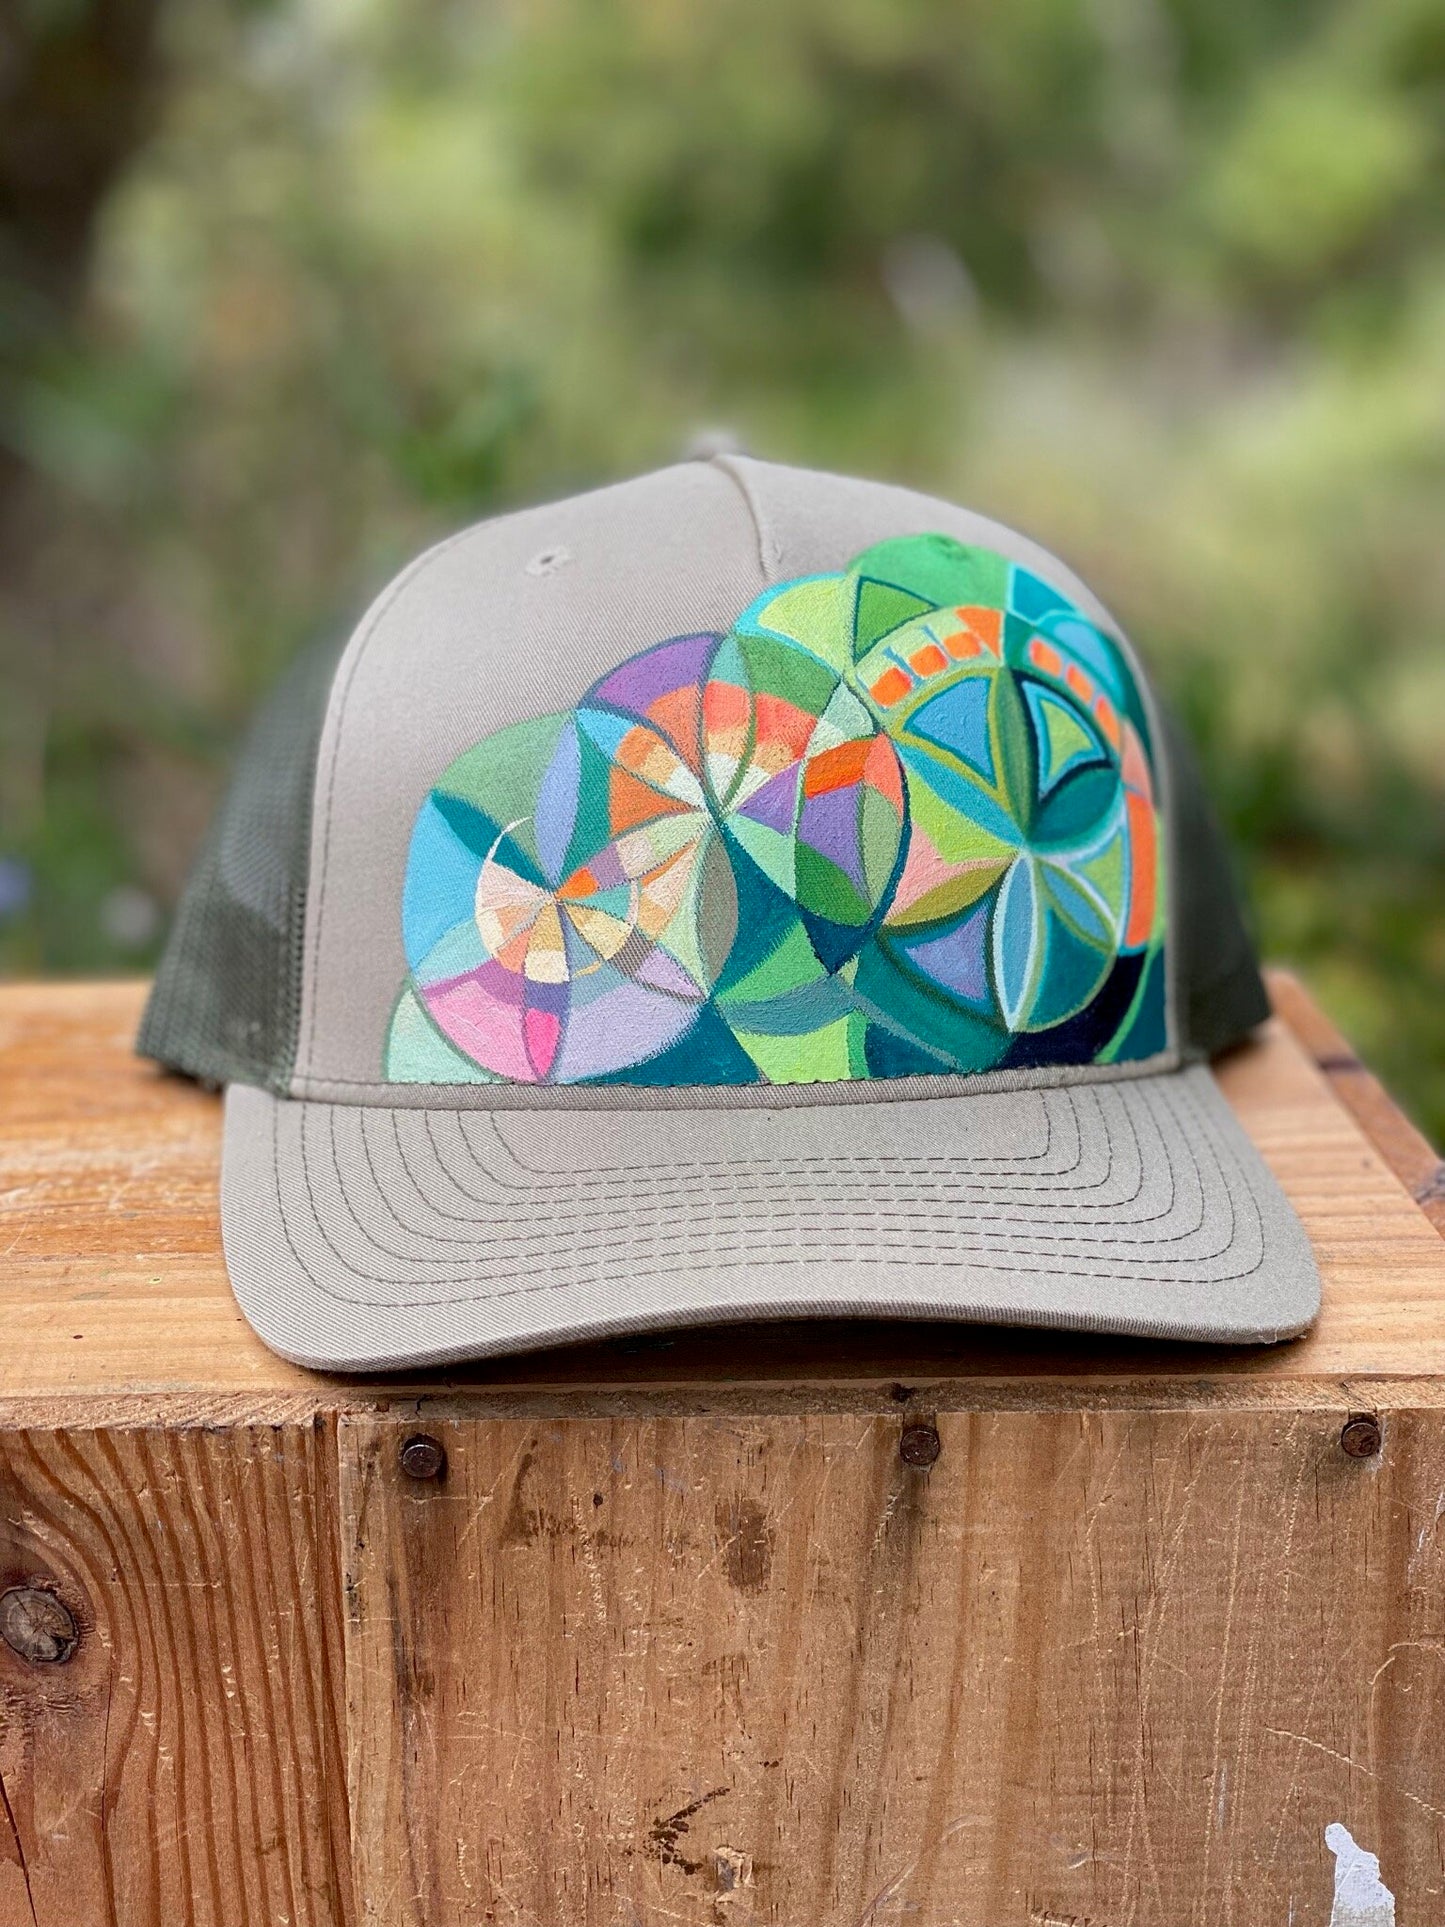 "Life Patterns" Hand Painted Hat